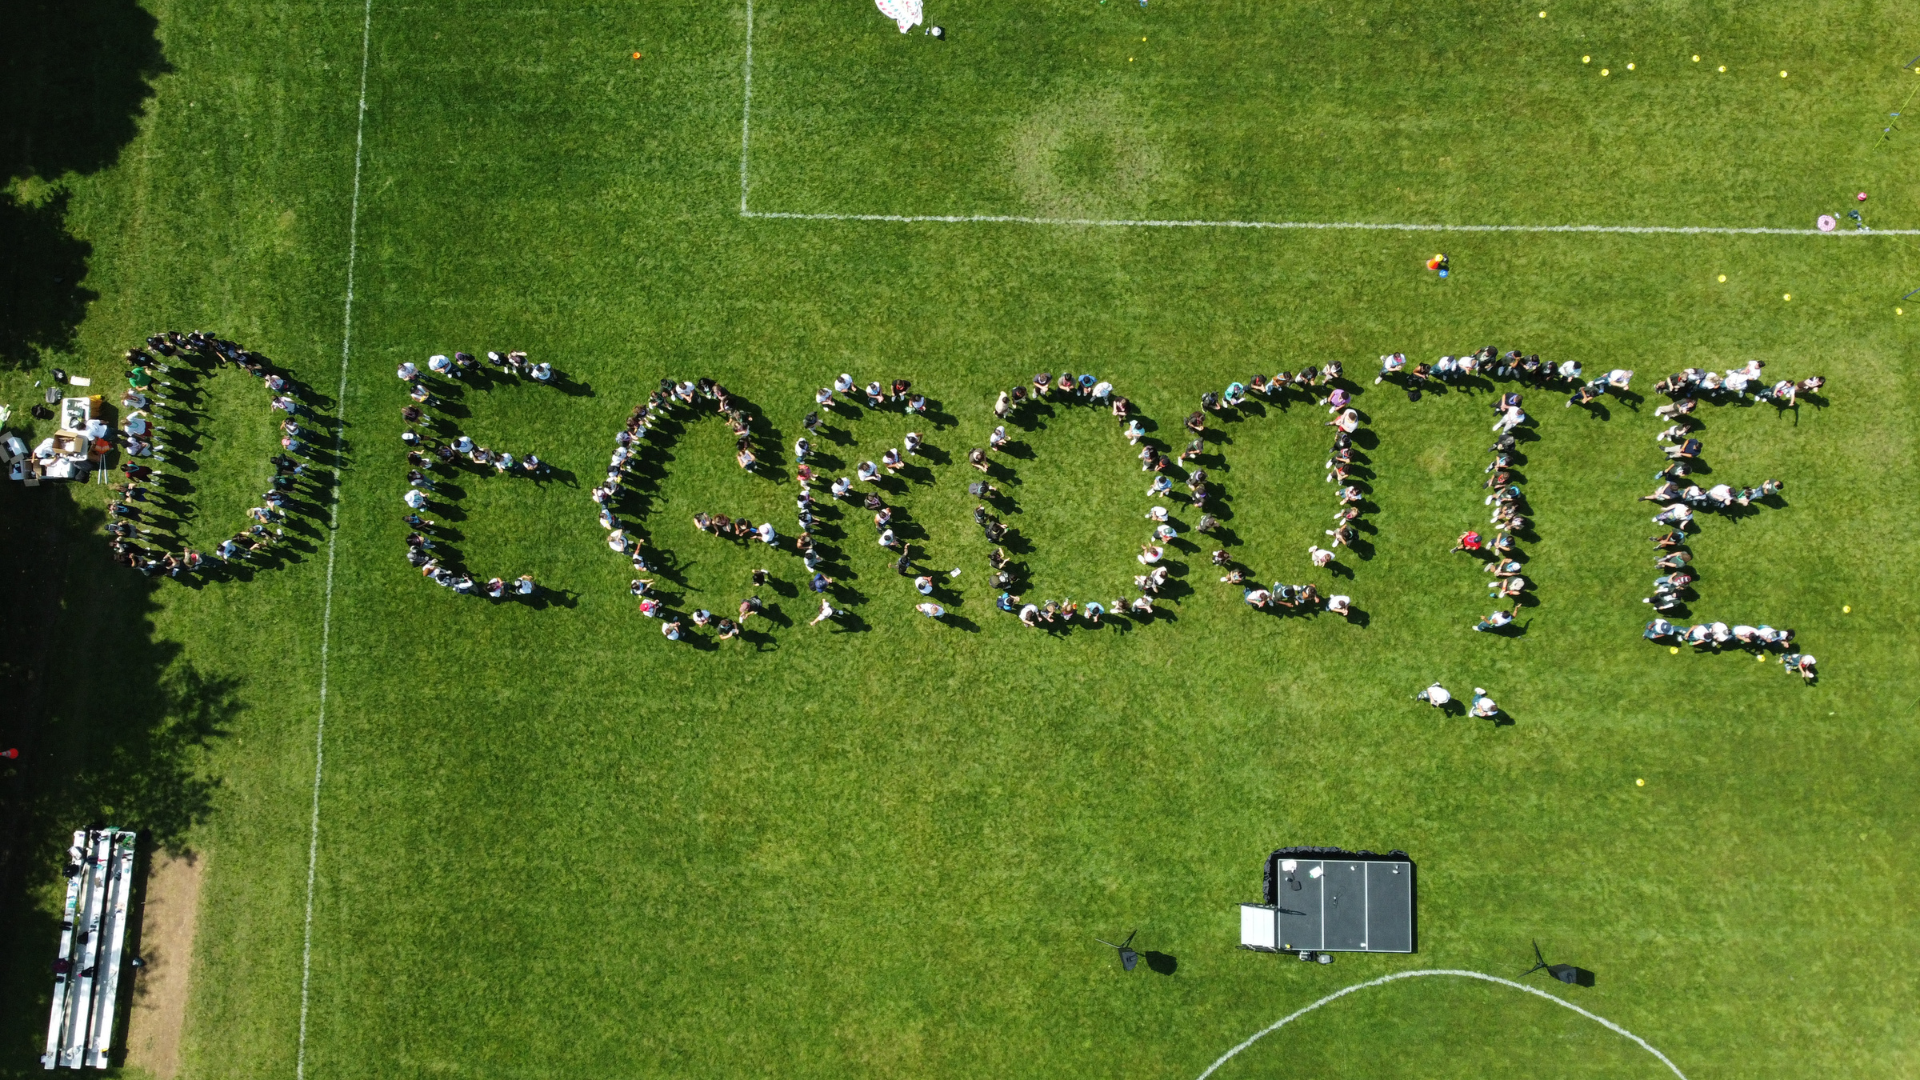 The grassy landscape reveals an artful arrangement of students forming the word 